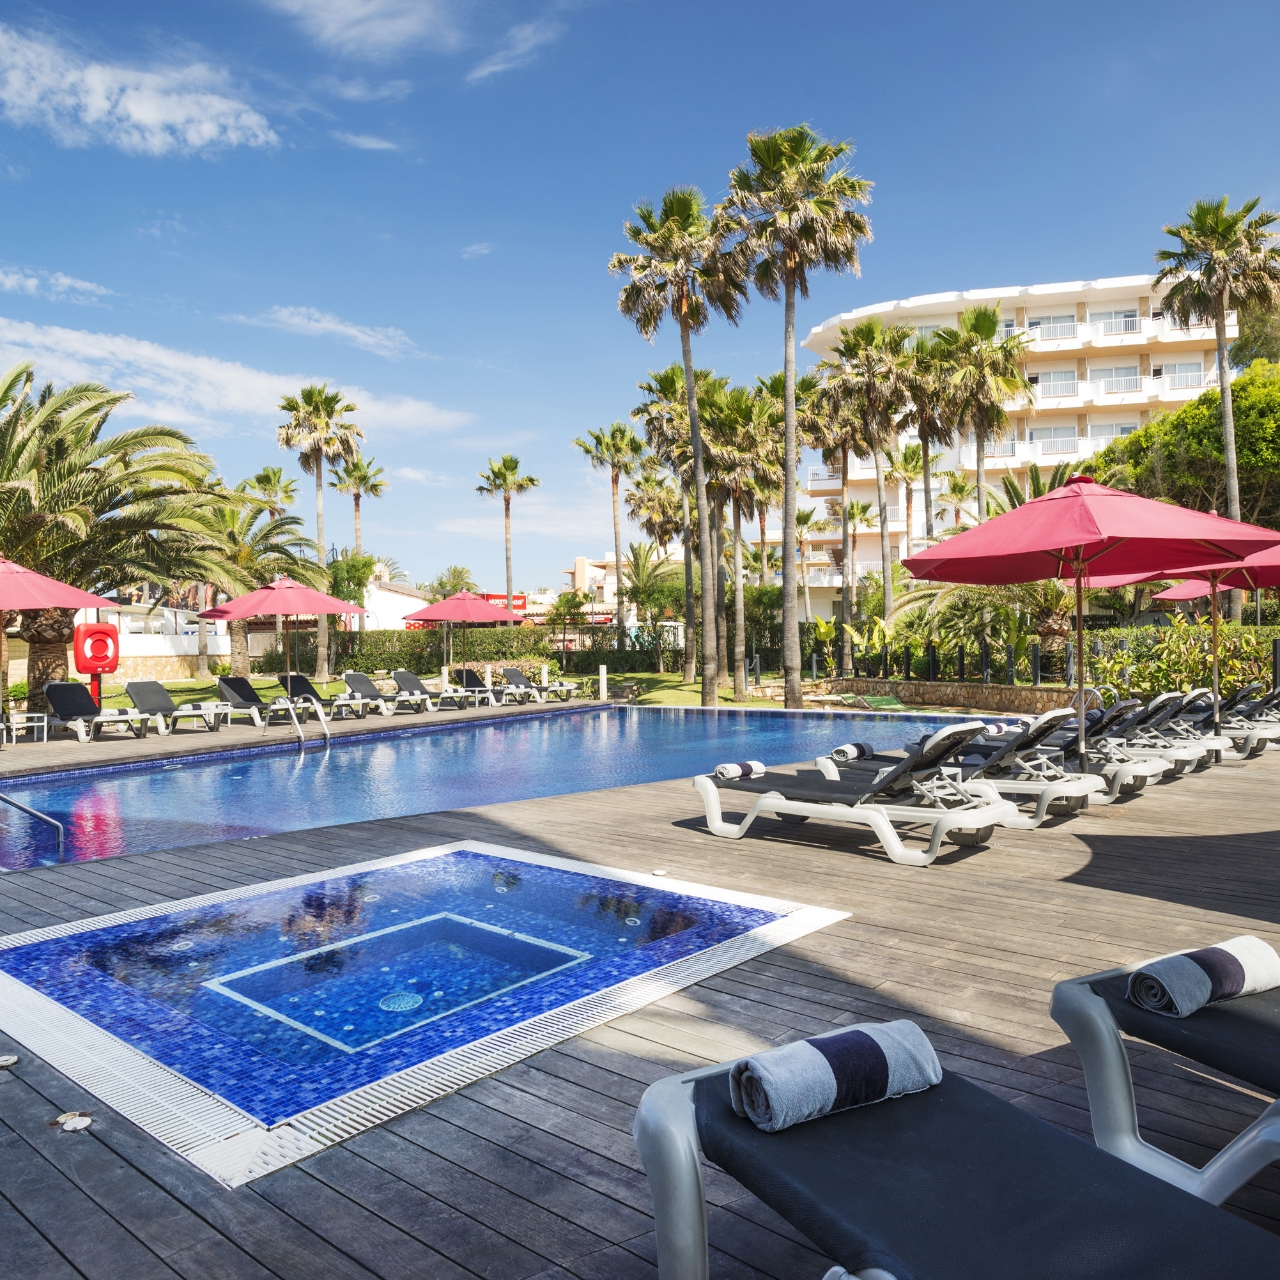 Hotel Playa Golf 4*Sup Palma de Mallorca at HRS with free services